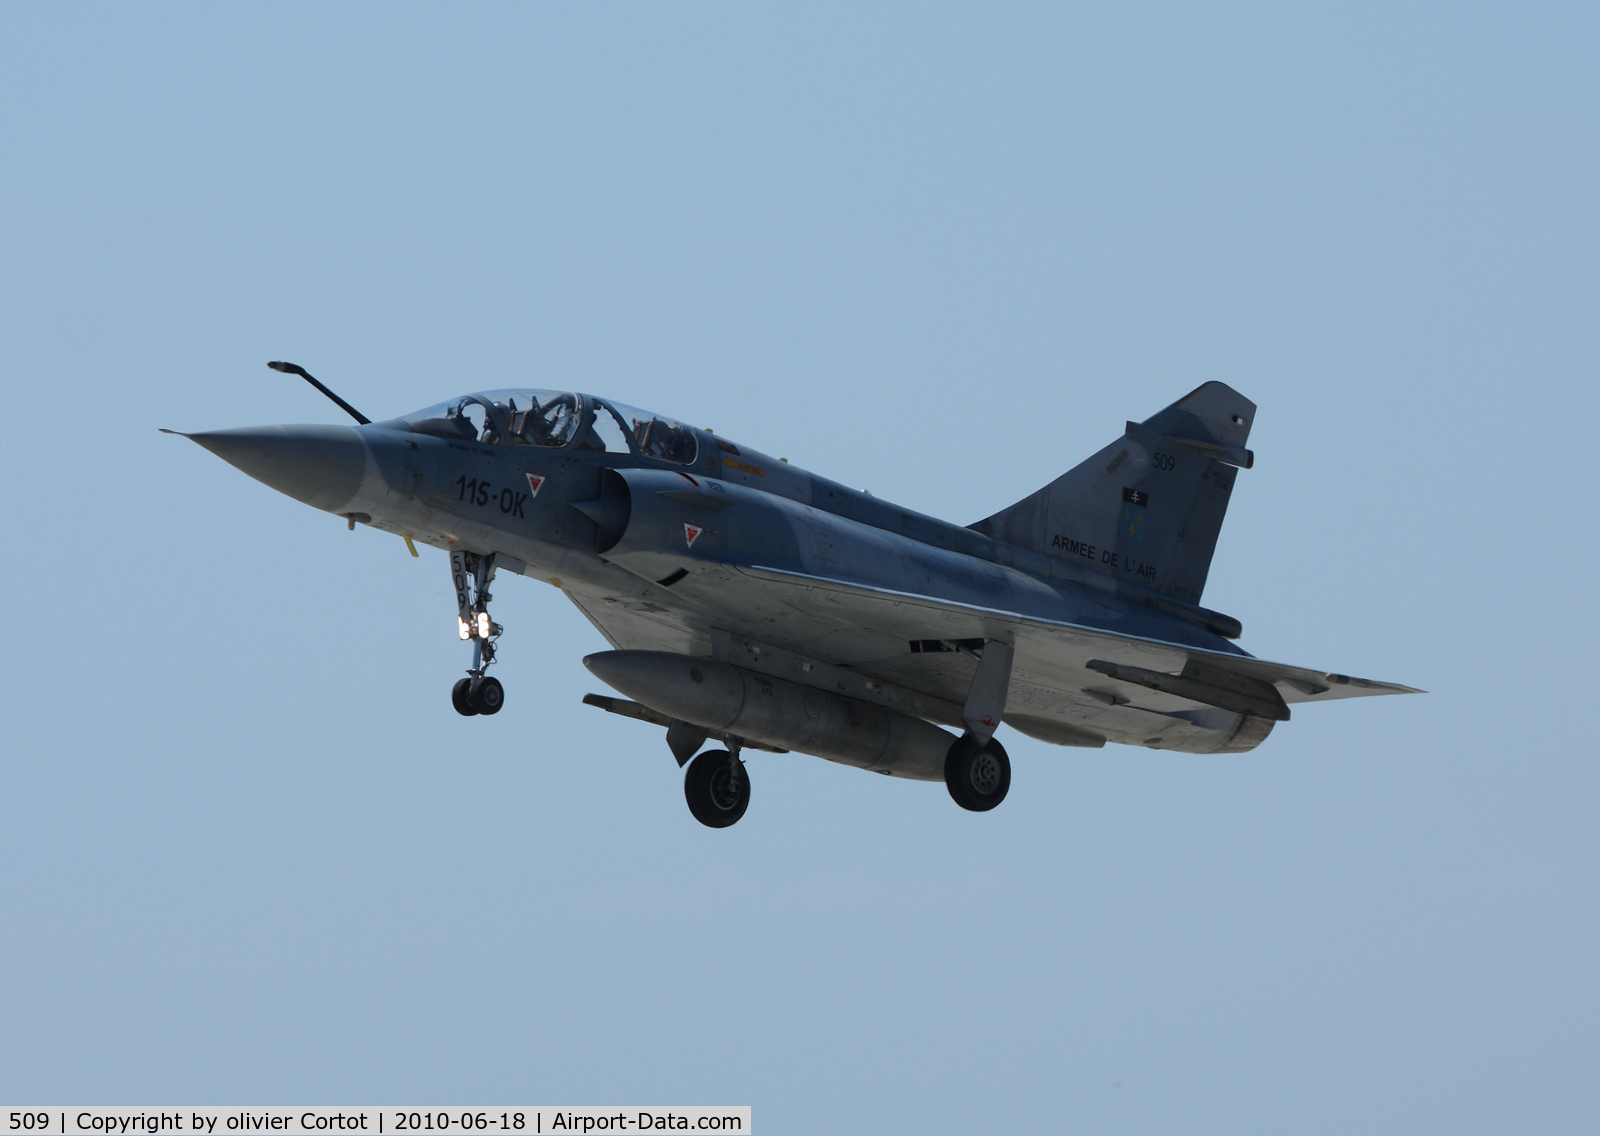 509, Dassault Mirage 2000B C/N 62, Istres French Air Force Base